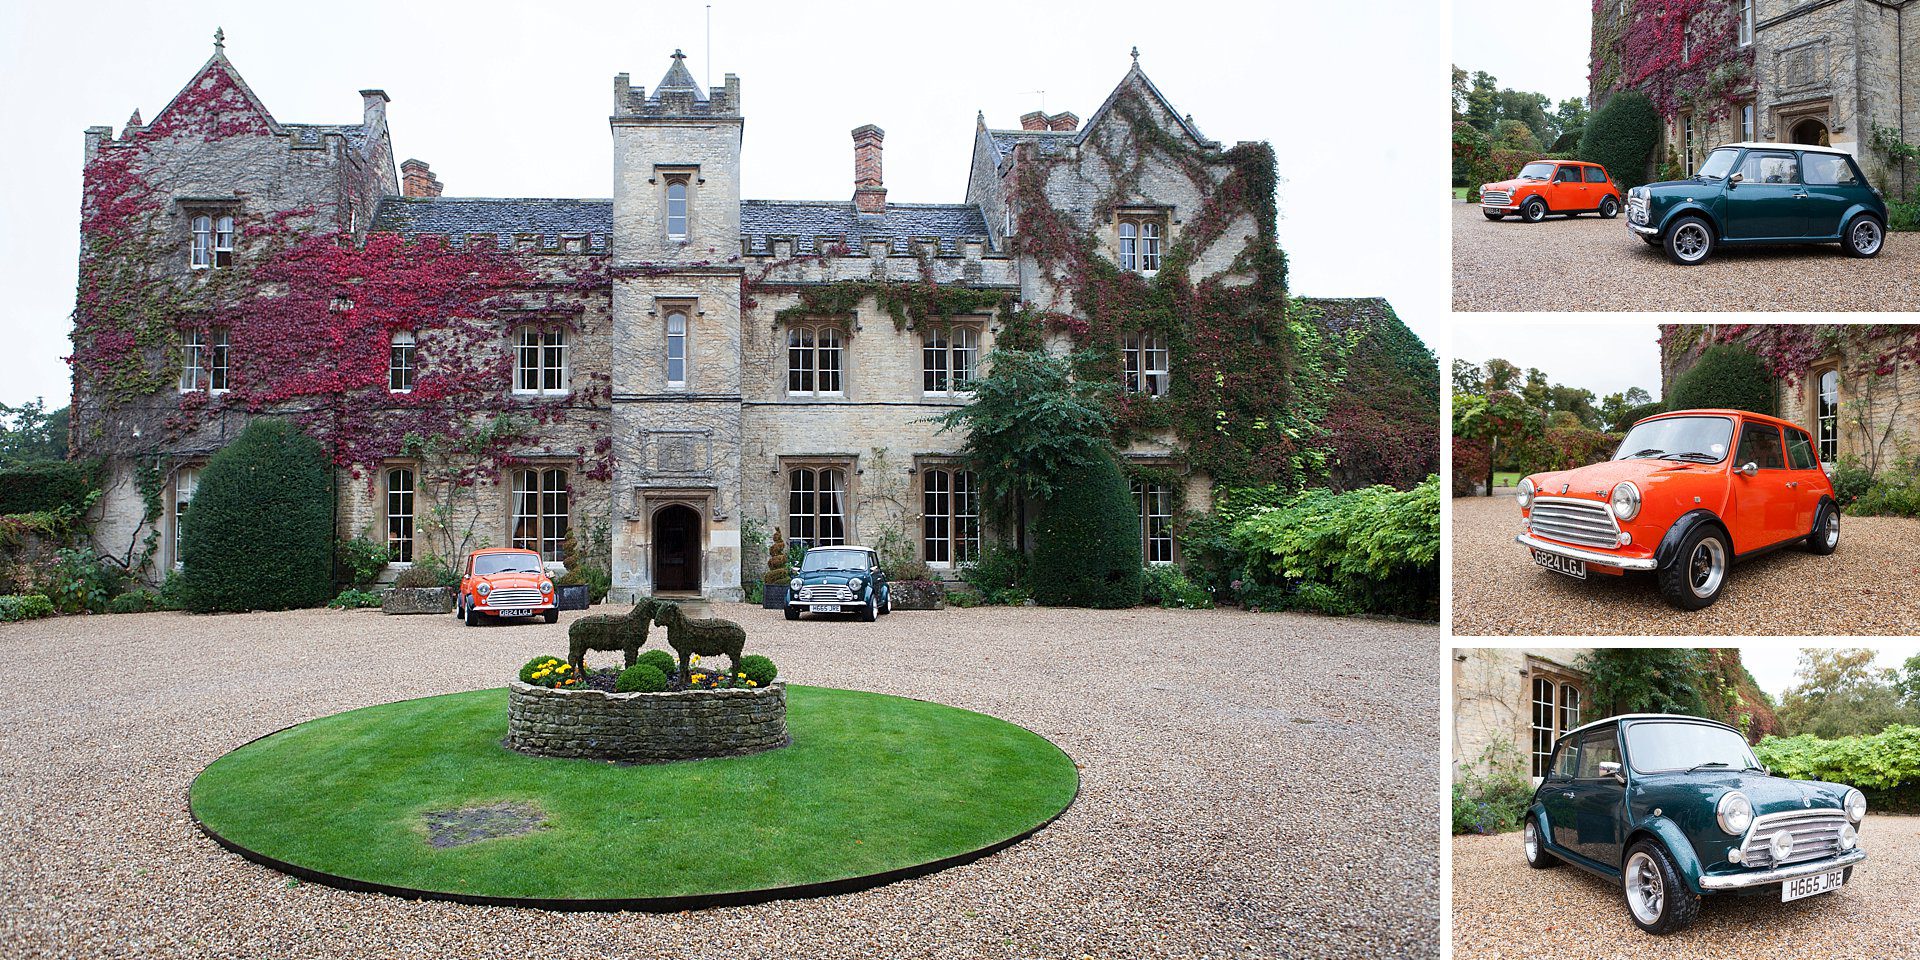 The Manor at Weston on the Green